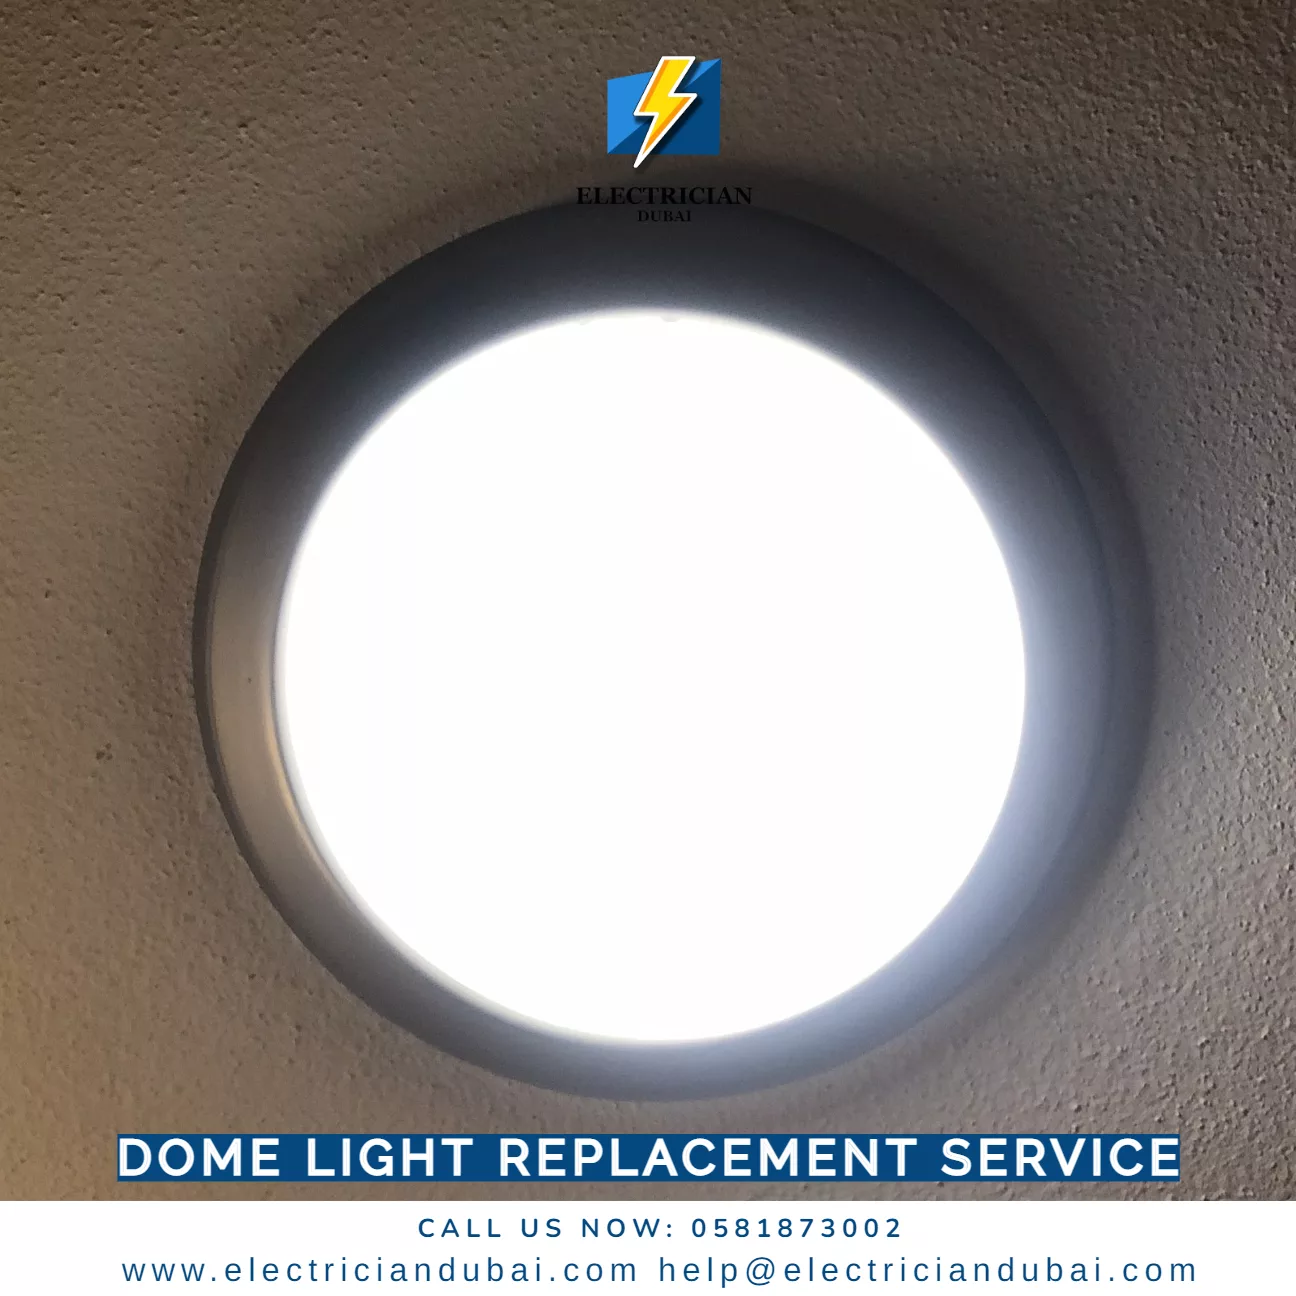 Dome Light Replacement Service